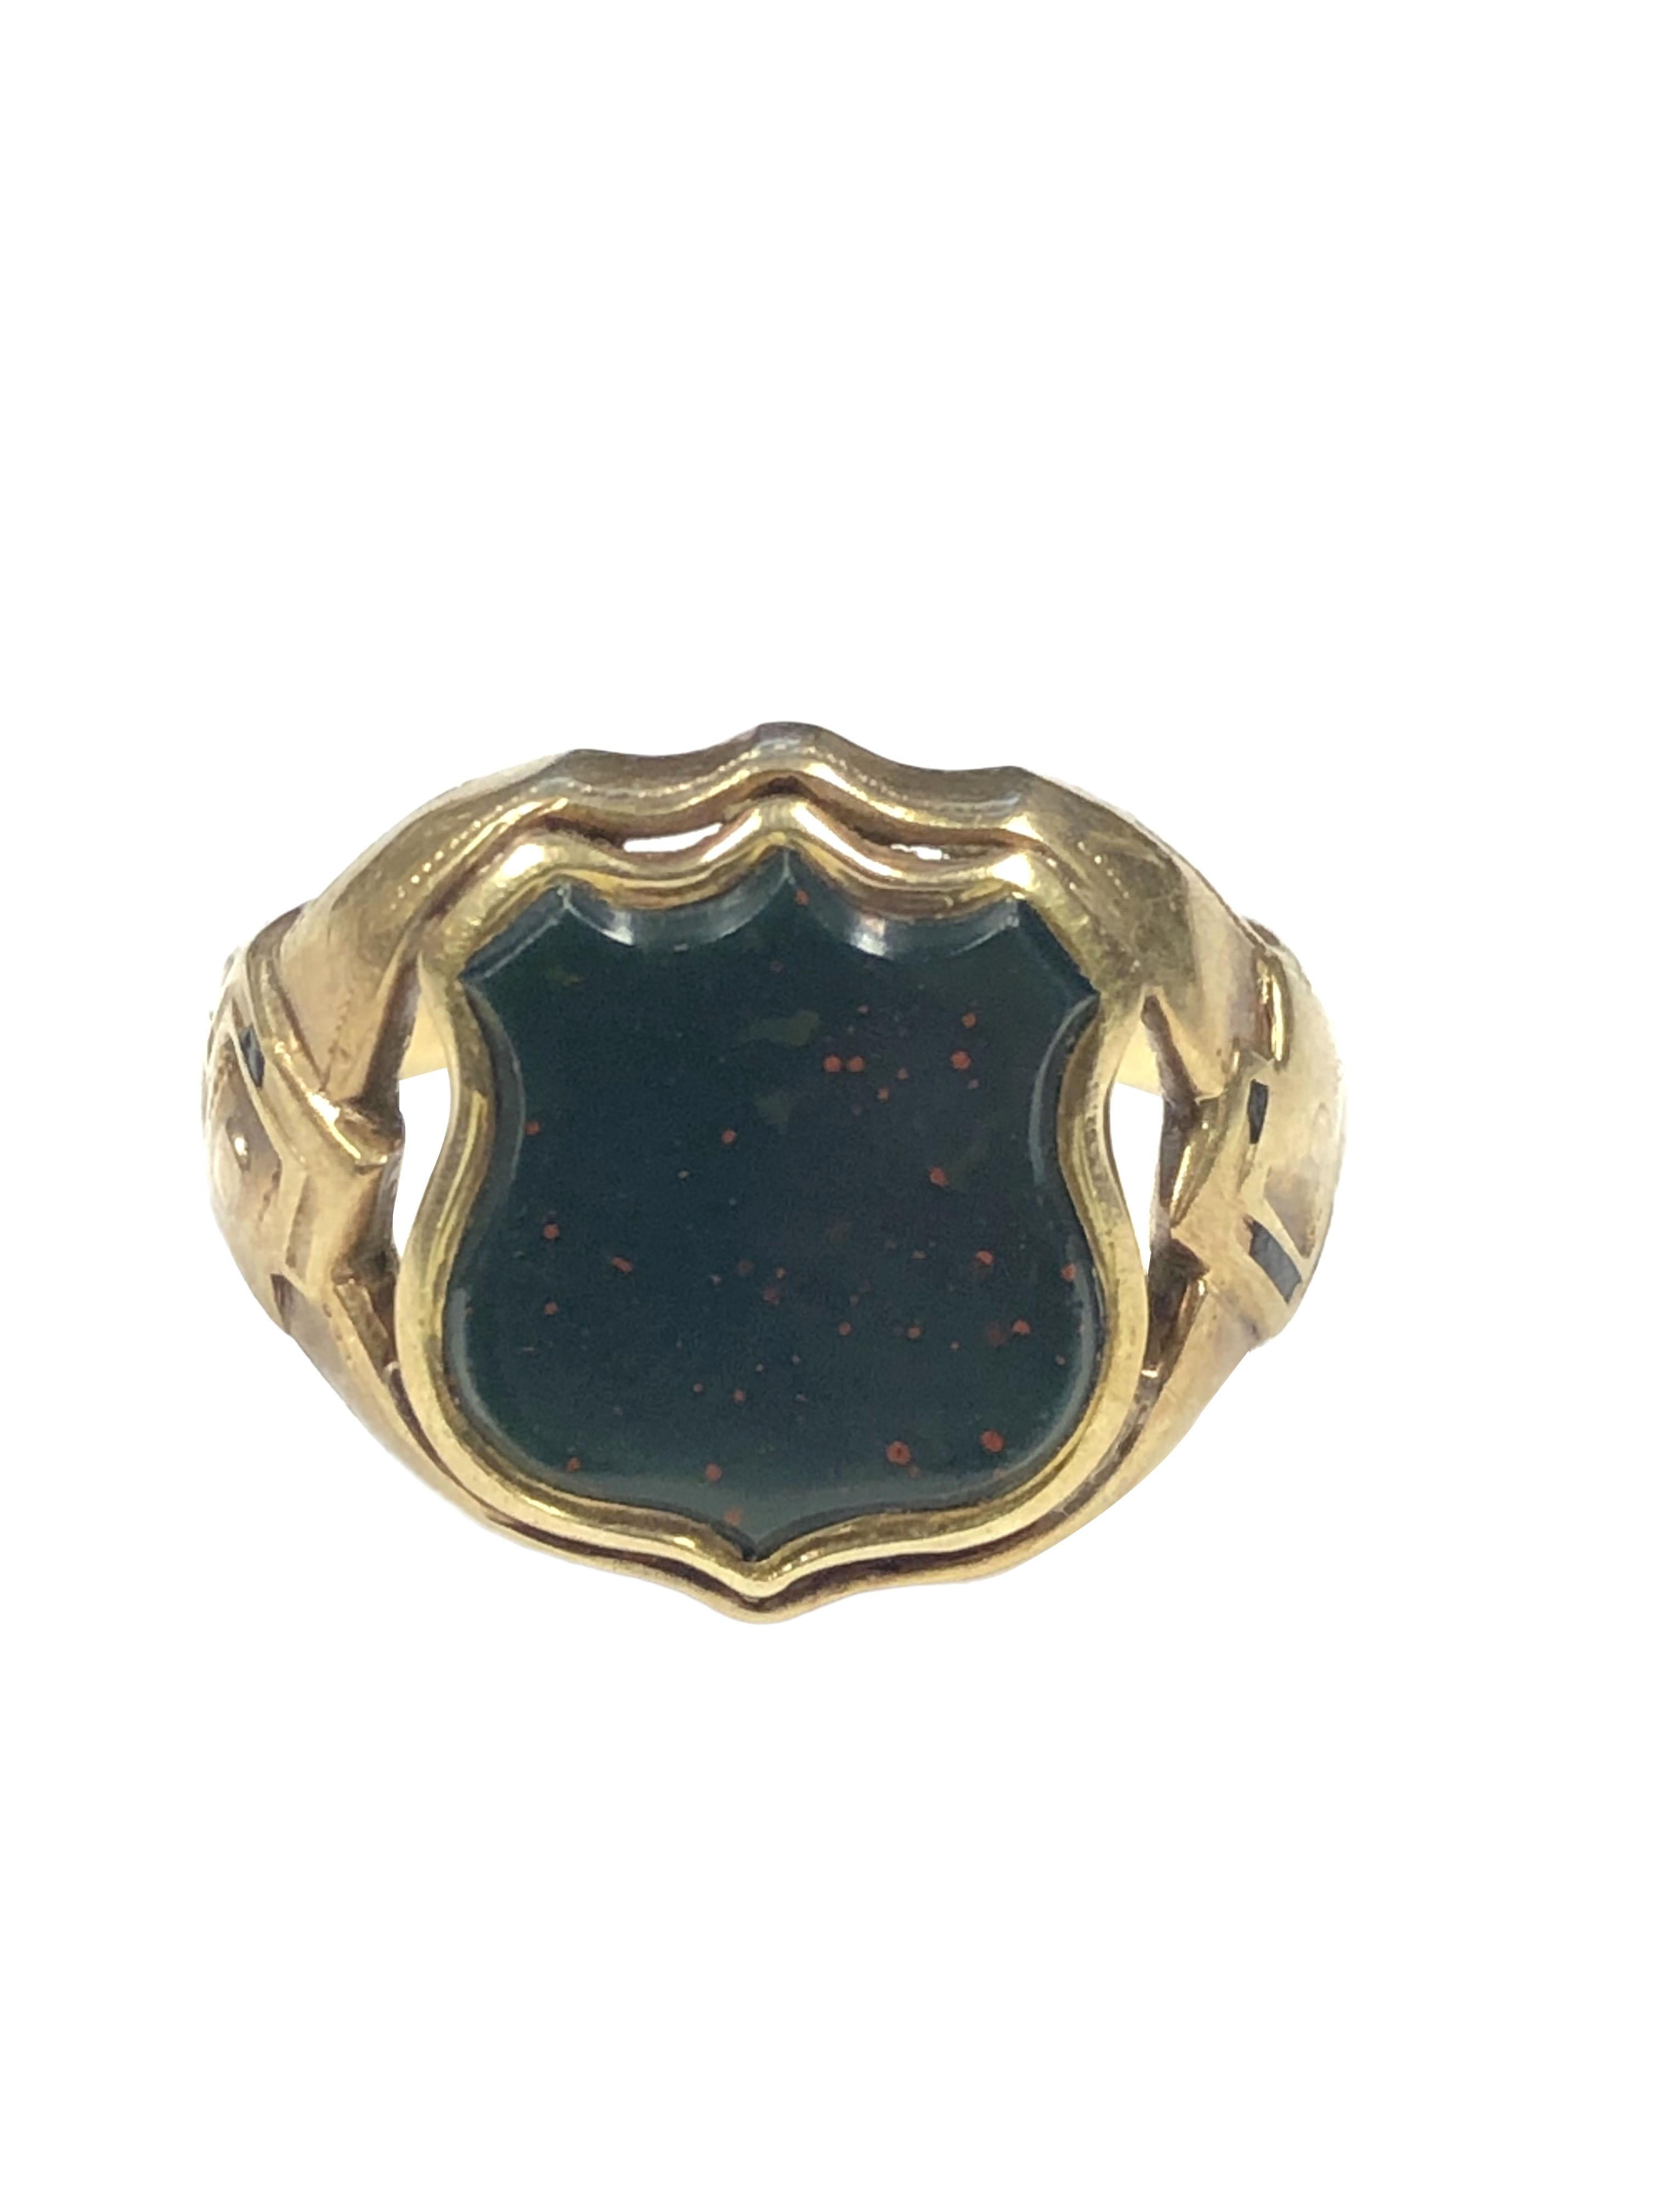 Circa 1900 Yellow Gold Signet ring, the top measures 1/2 X 1/2 inch and is set with a Blood stone Shield, Finger size 9